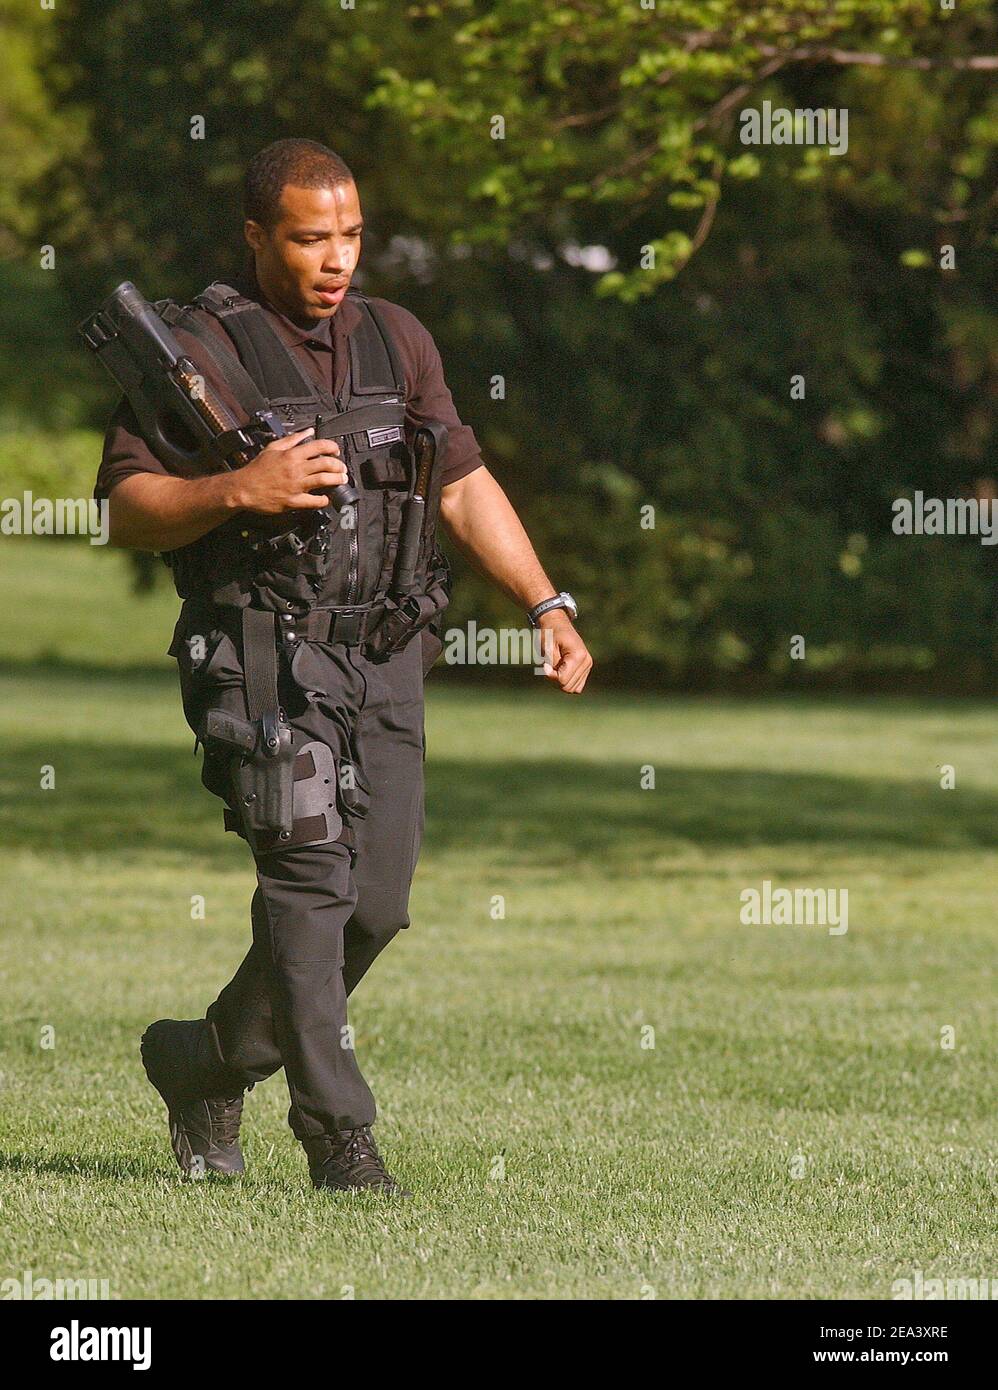 High security in the garden of the White House in Washington on Tuesday, April 26, 2005, in Washington, DC. Photo by Olivier Douliery/ABACA Stock Photo